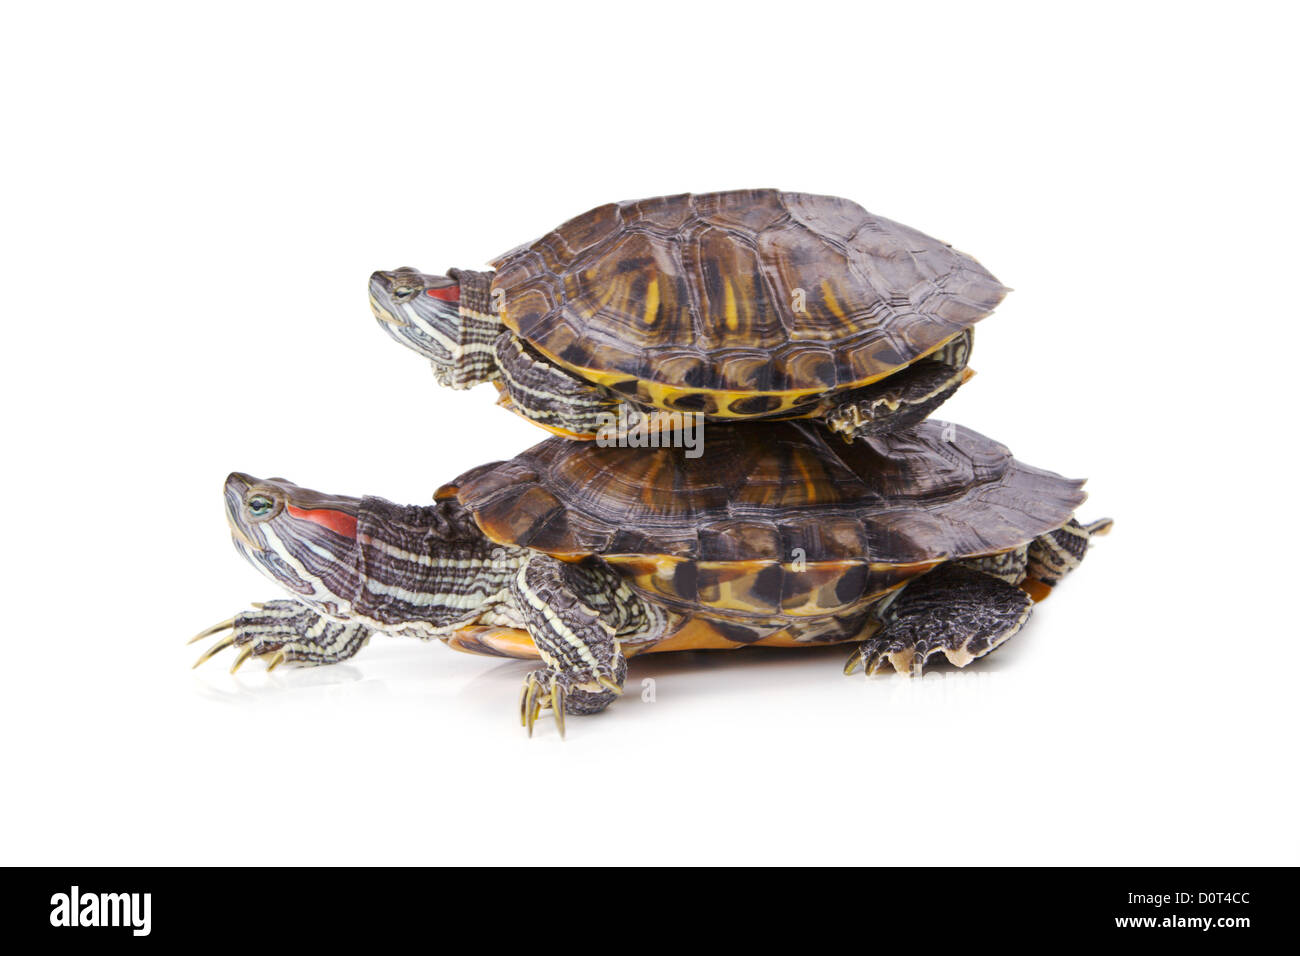 Two aquatic turtle, one over another Stock Photo